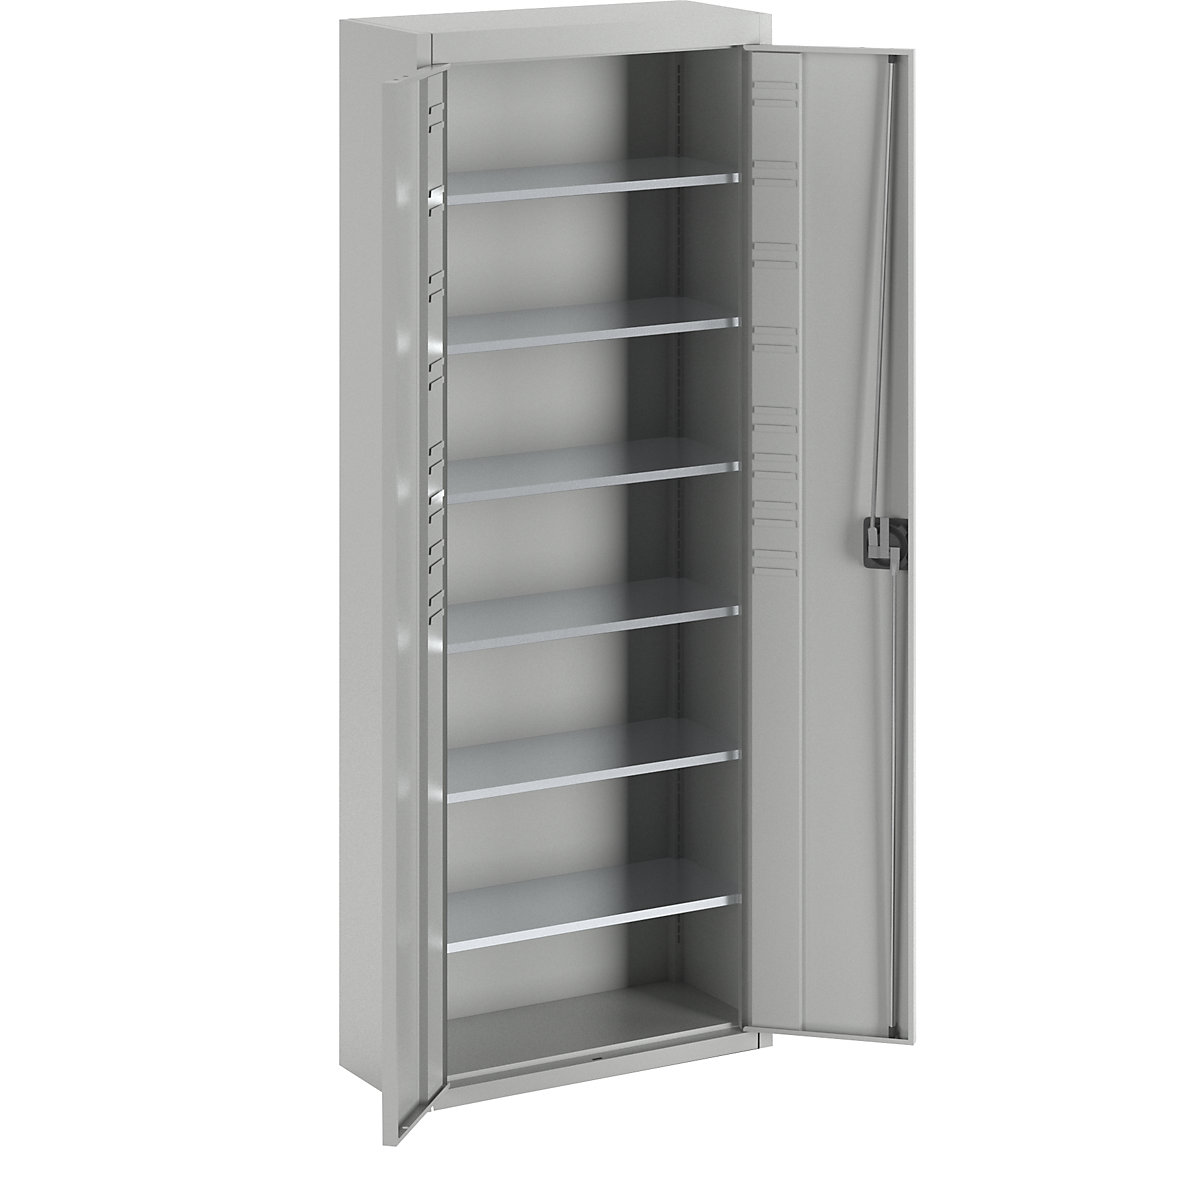 Storage cupboard, without open fronted storage bins – mauser, HxWxD 1740 x 680 x 280 mm, single colour, light grey-7